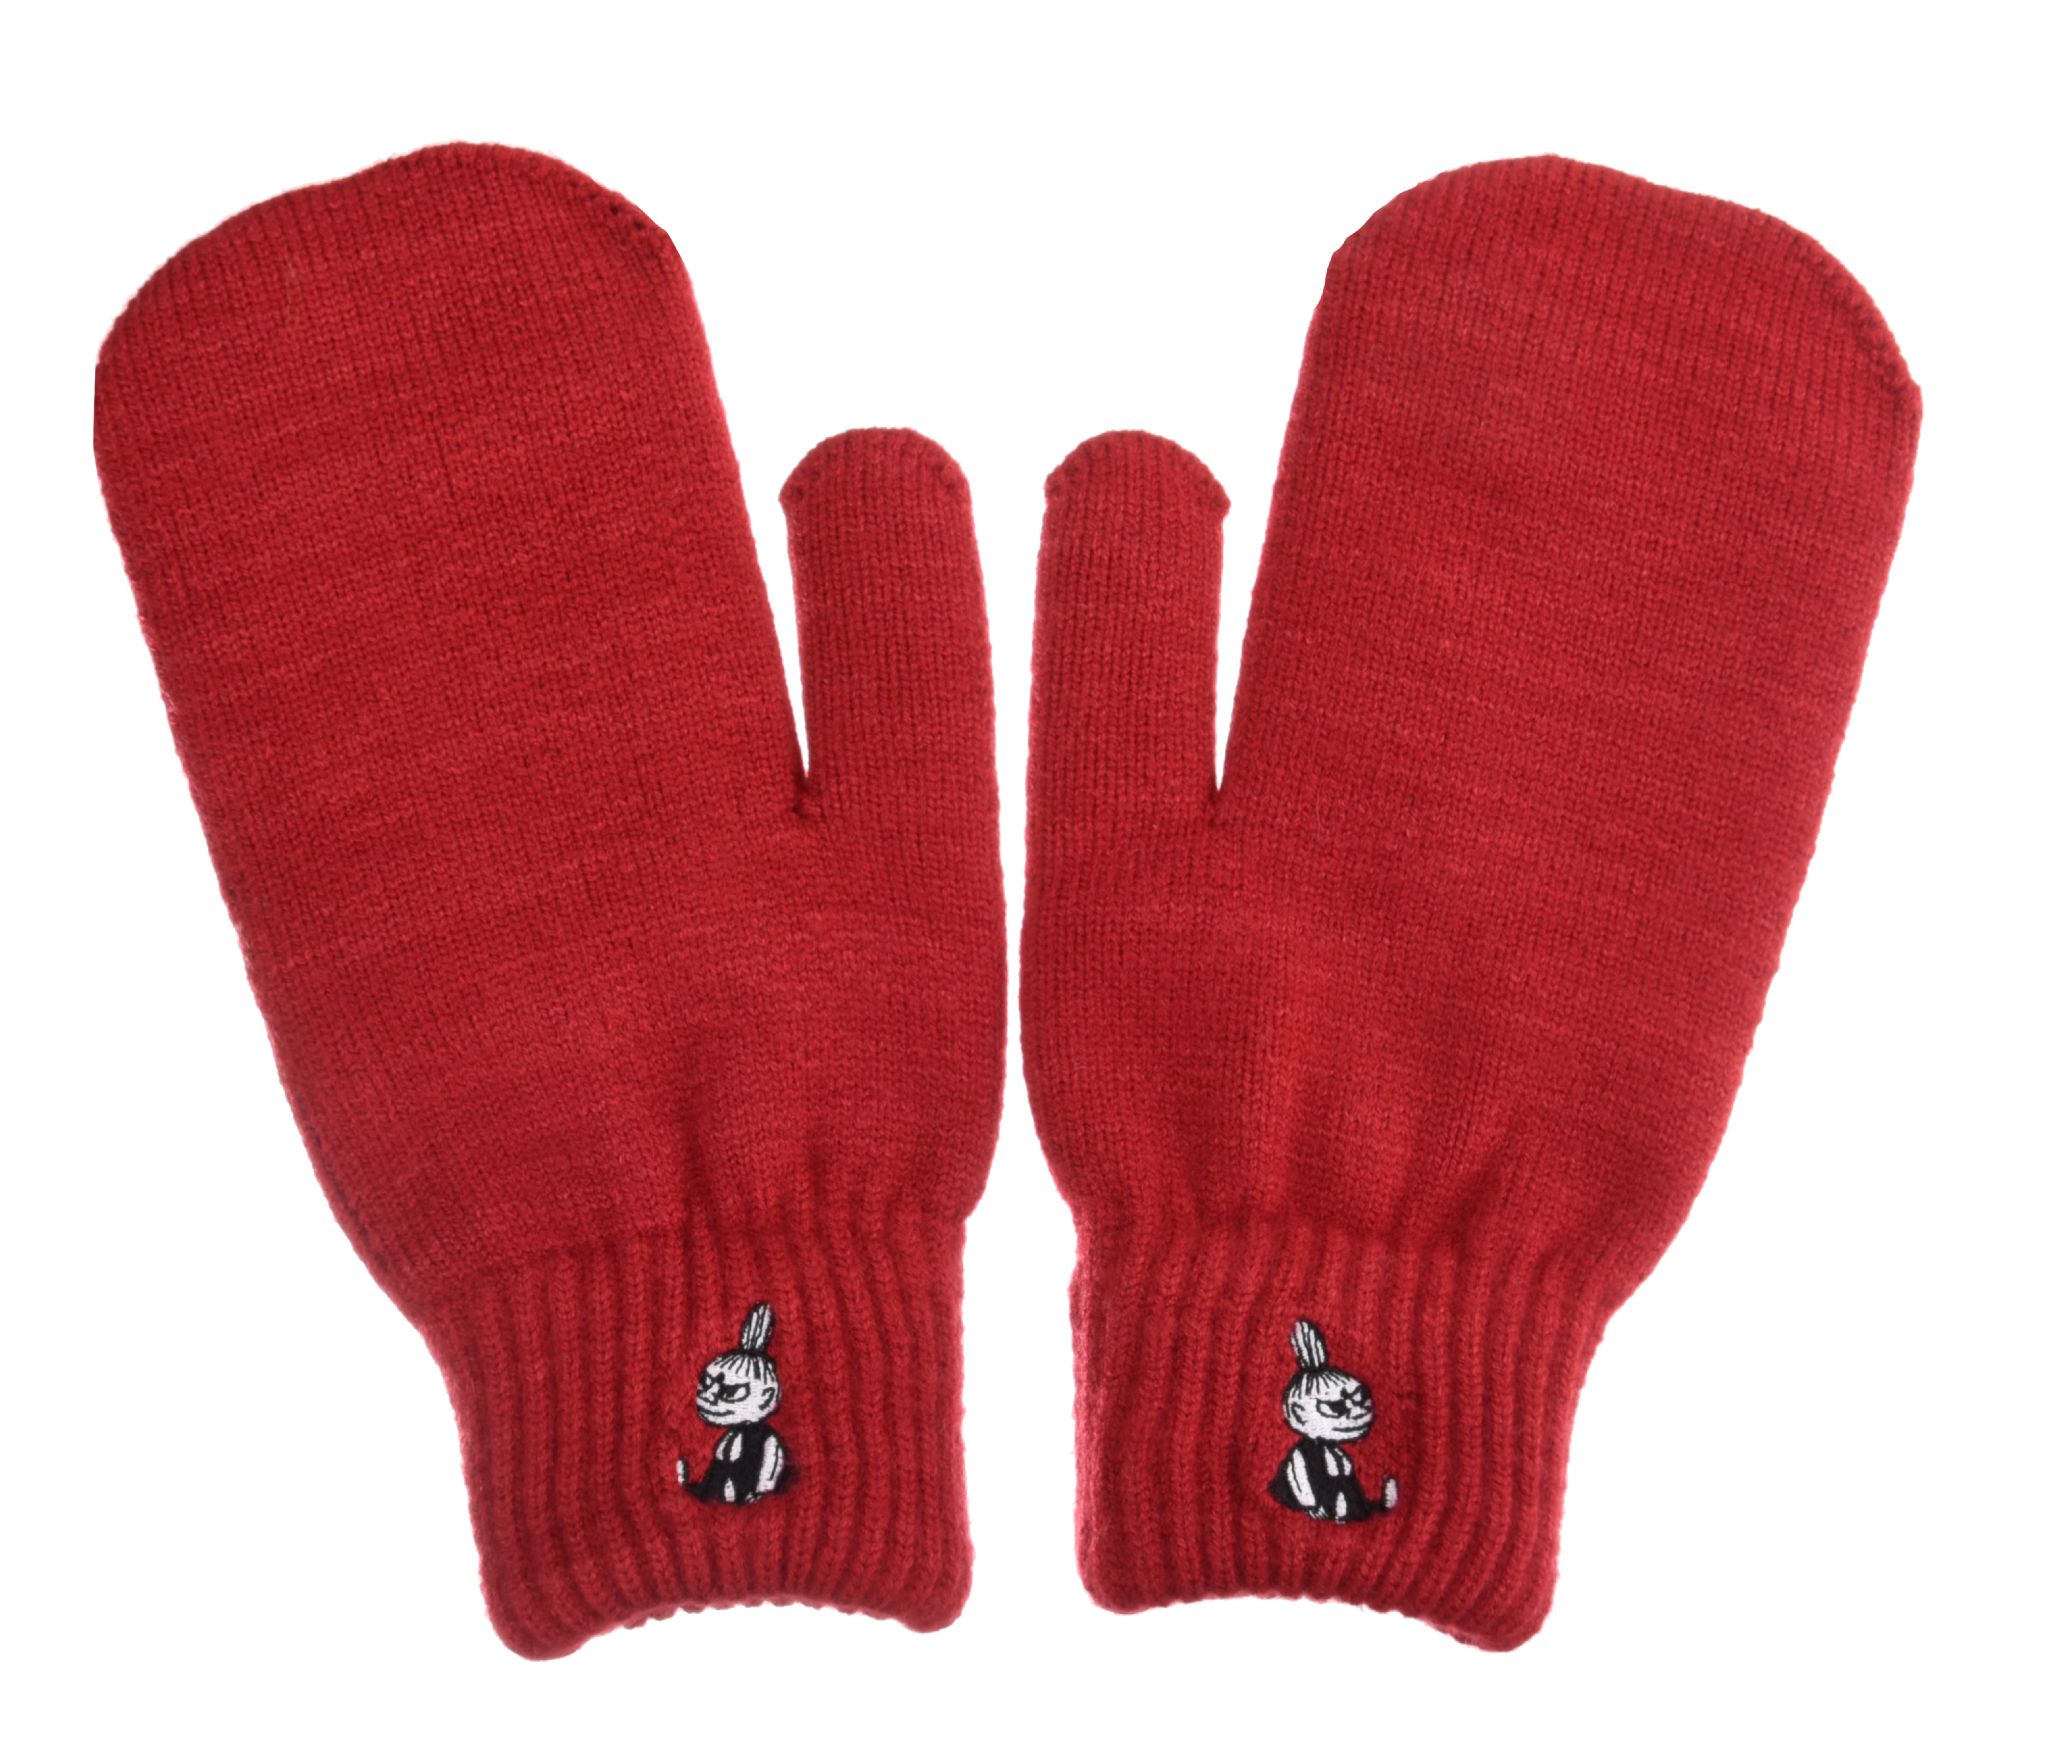 [Moomin] Little My Mittens Adult Red